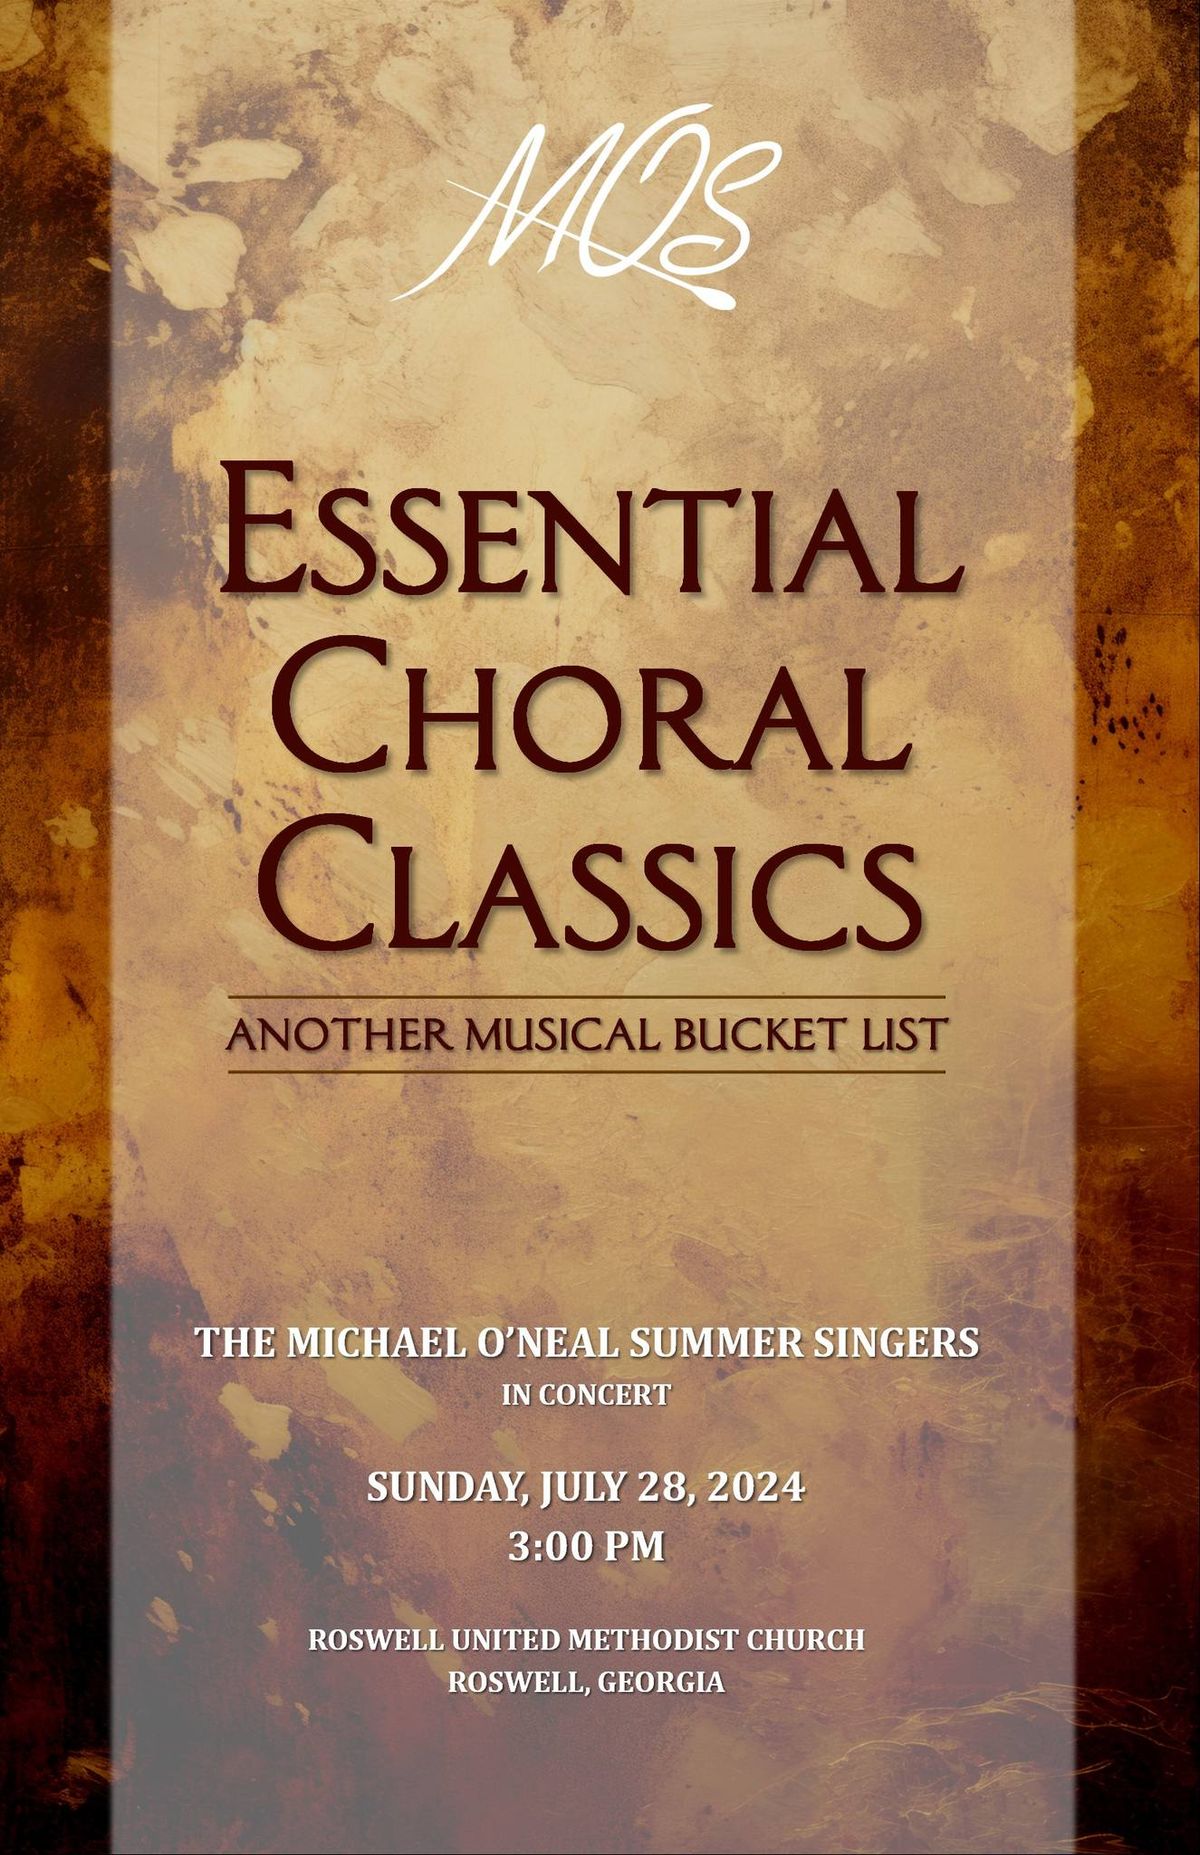 Essential Choral Classics: Another Musical Bucket List